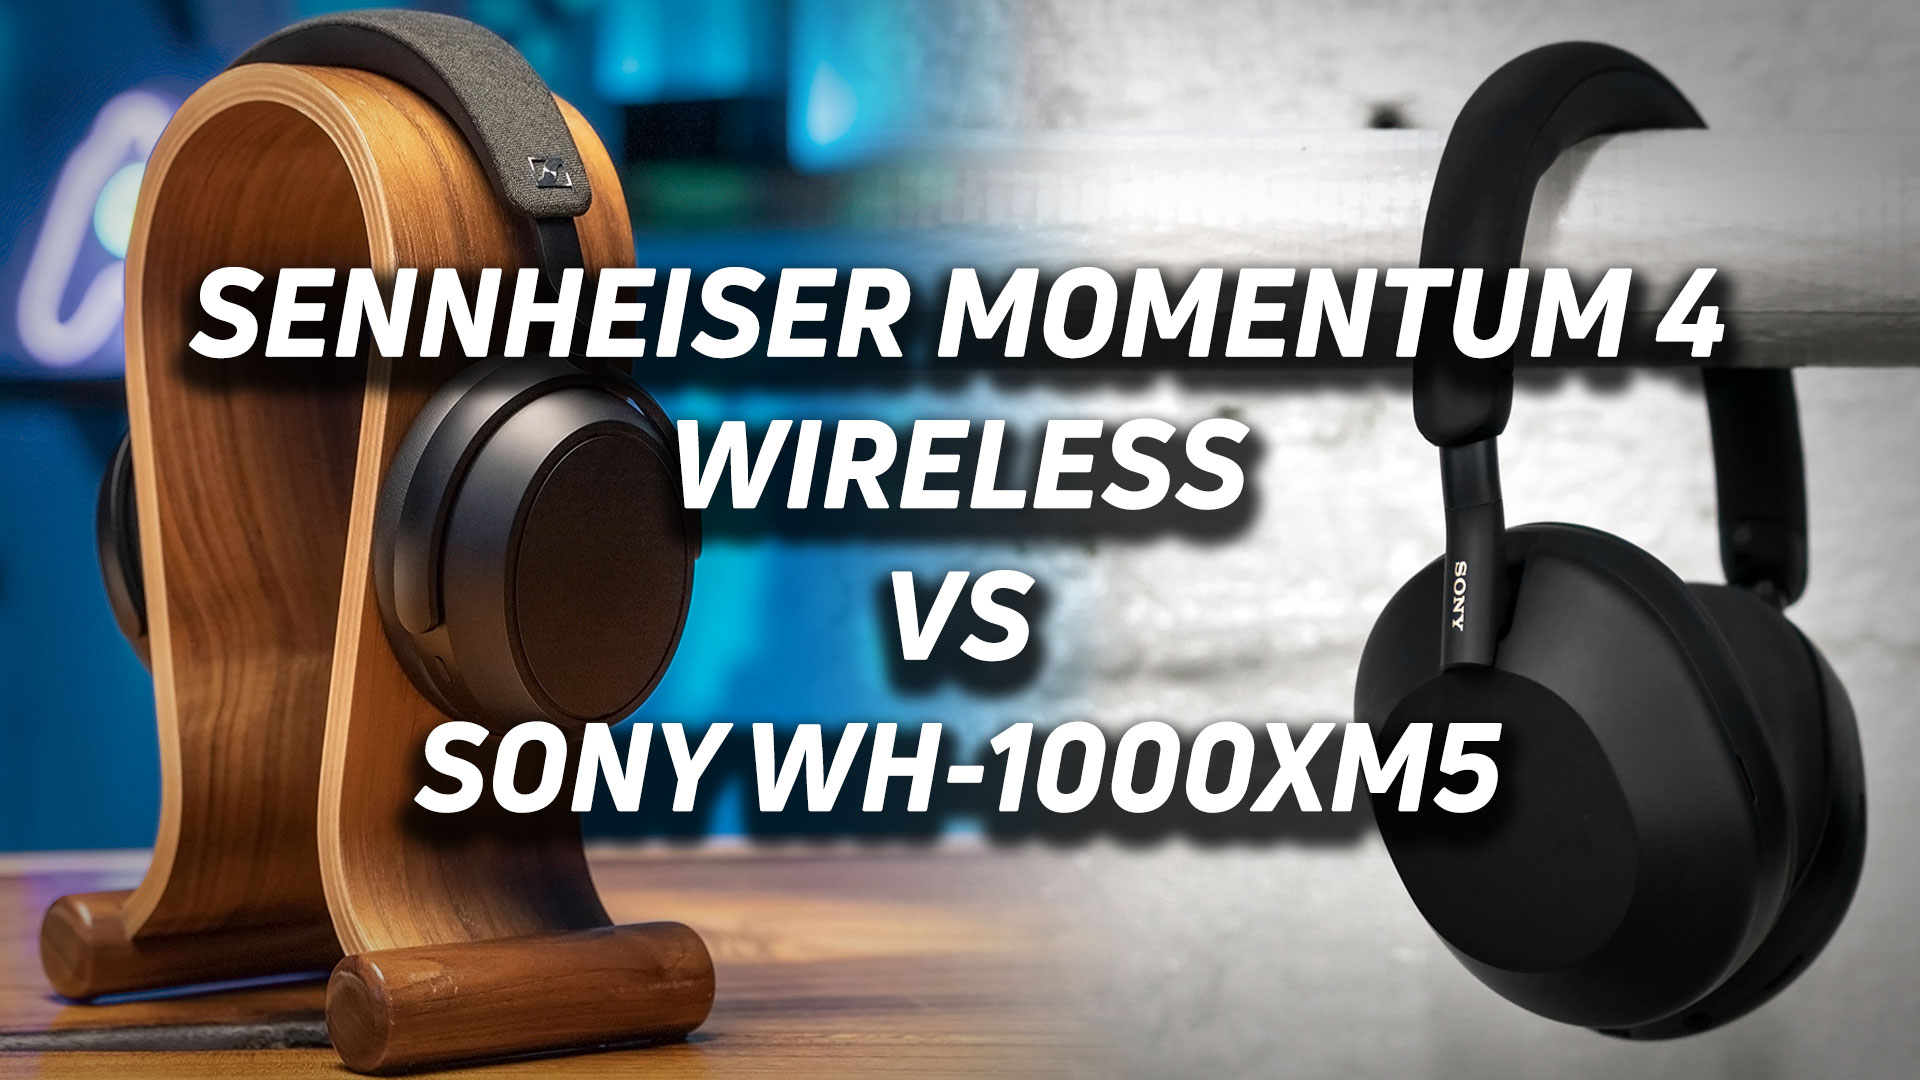 A blended image of the Sennheiser MOMENTUM 4 Wireless and Sony WH-1000XM5 noise canceling headphones with versus text overlaid.